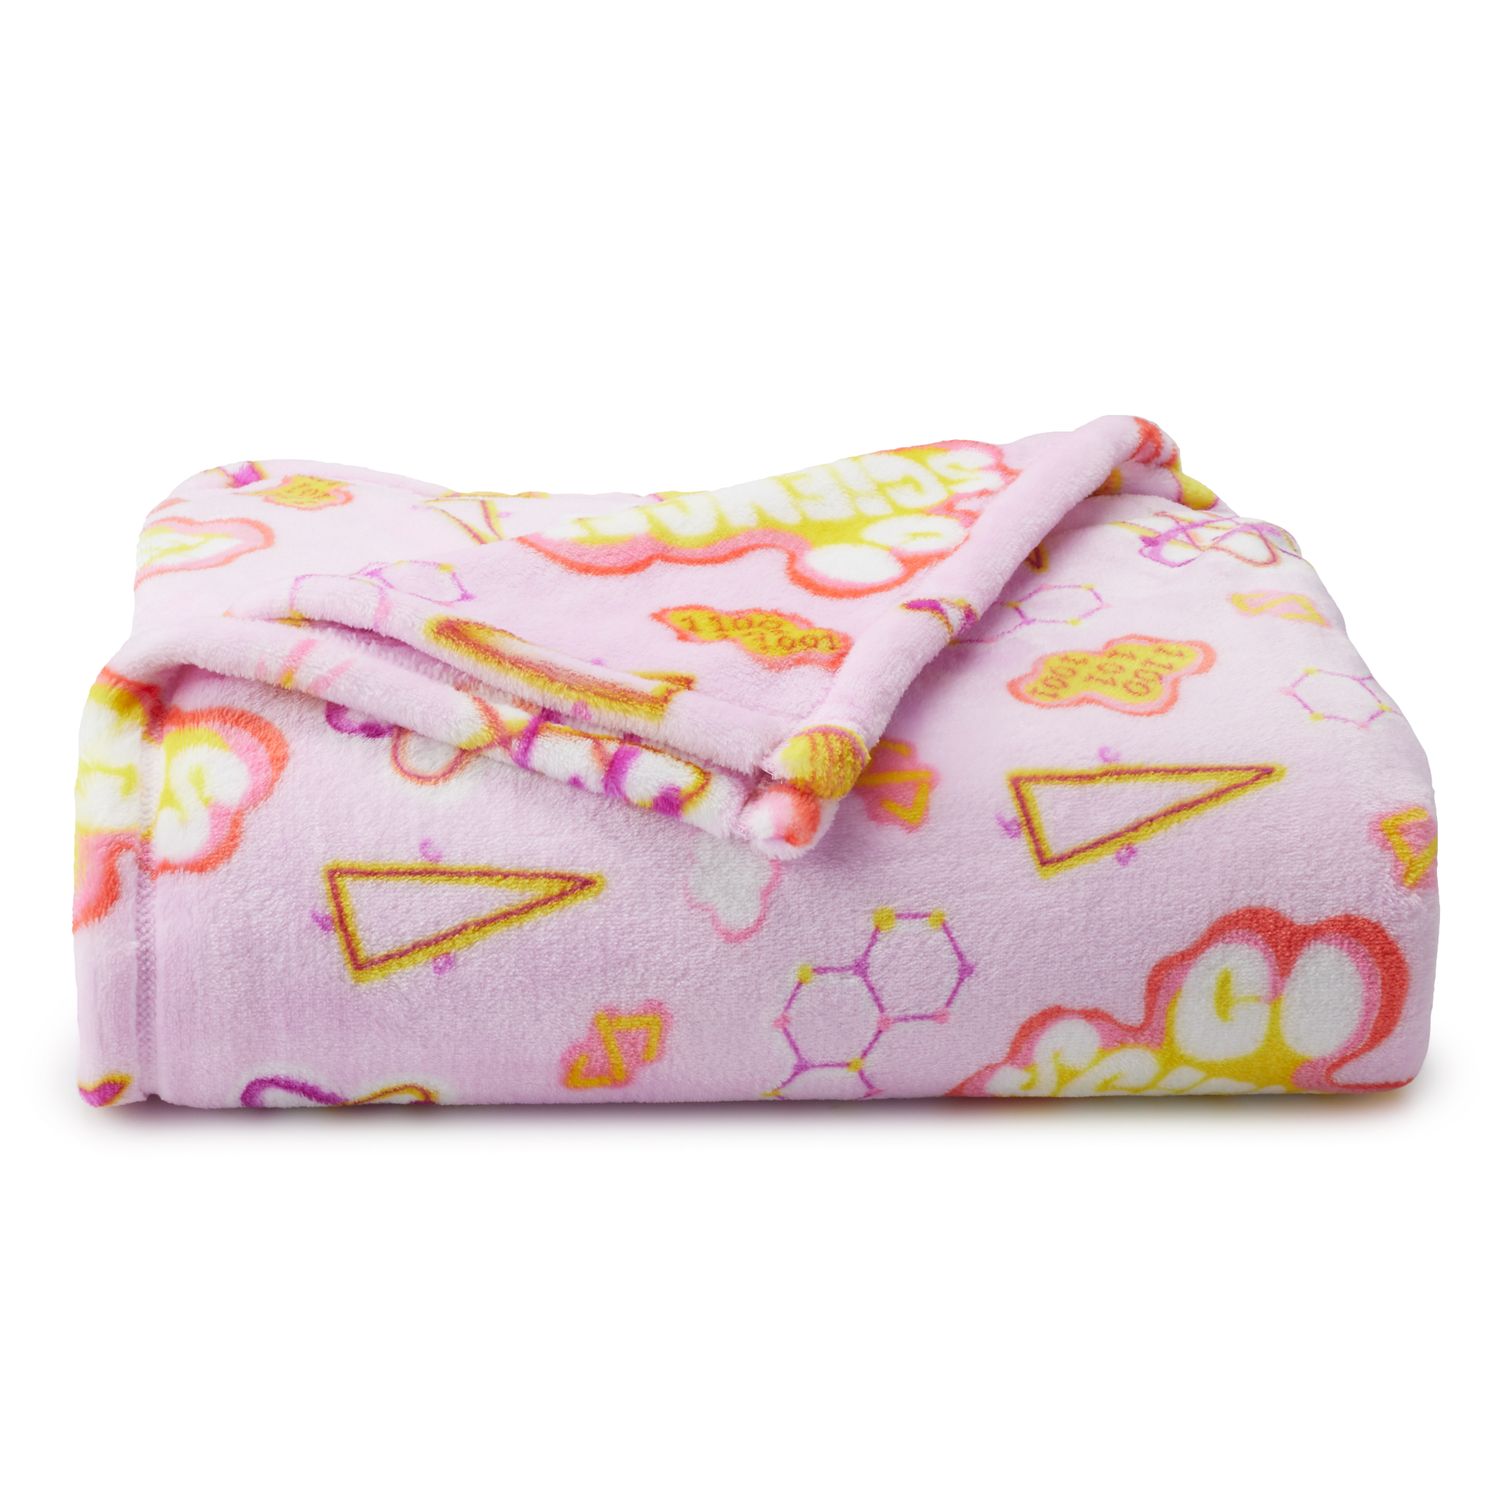 The Big One Oversized Supersoft Plush Throw - $8.49 (Kohl's)